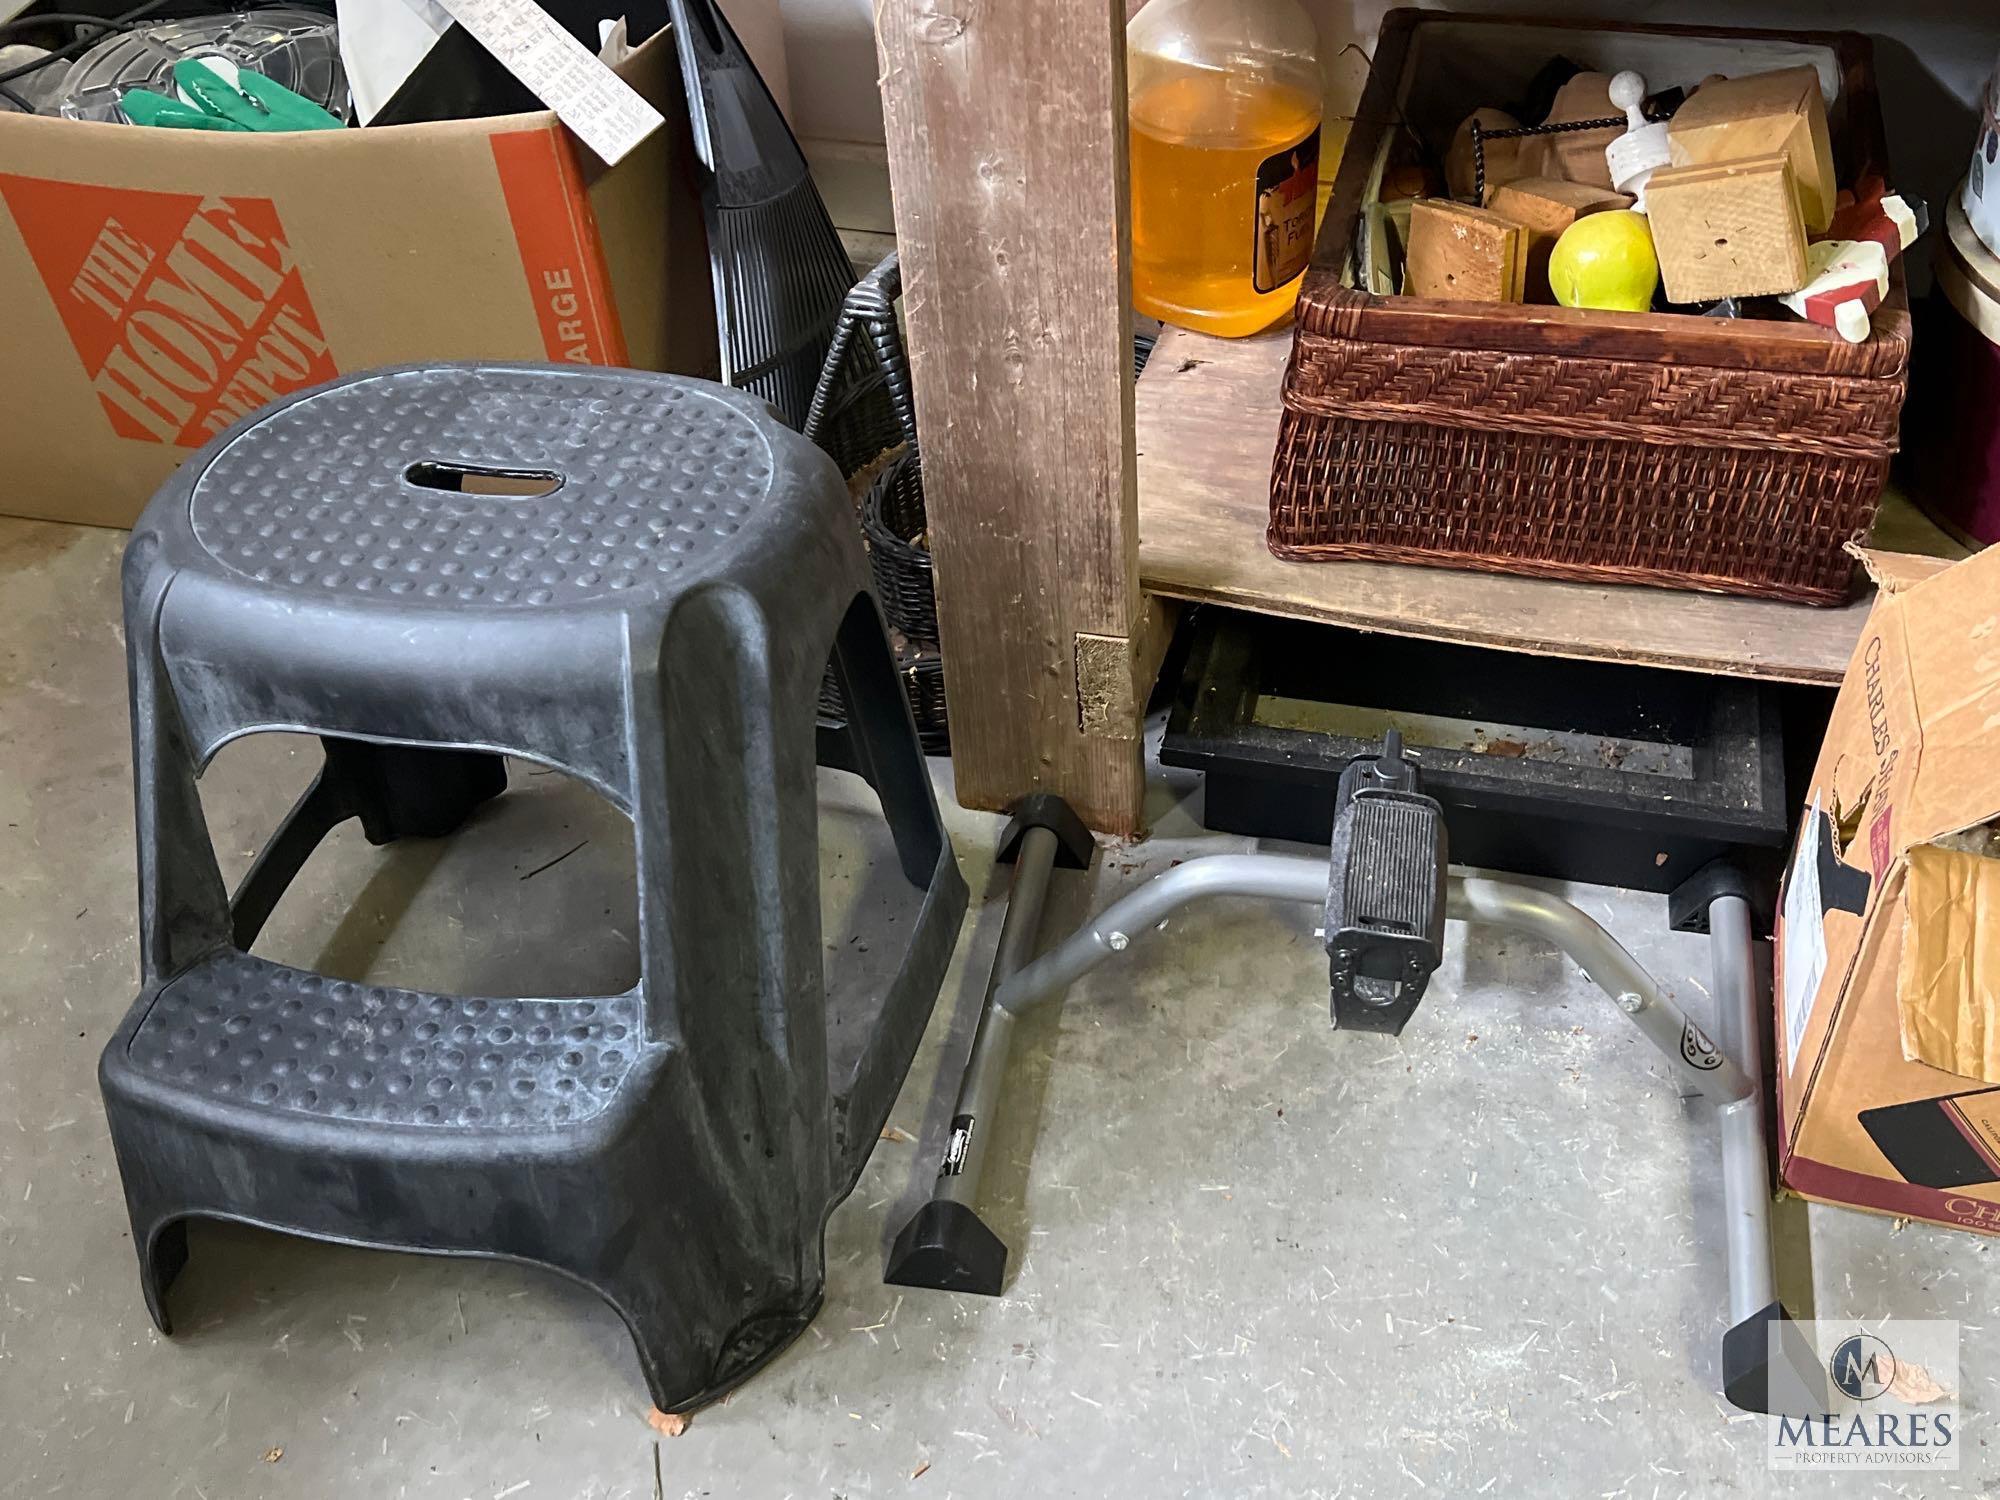 Contents of Shelf and Table in Garage - Stool, Tools, Craft Supplies